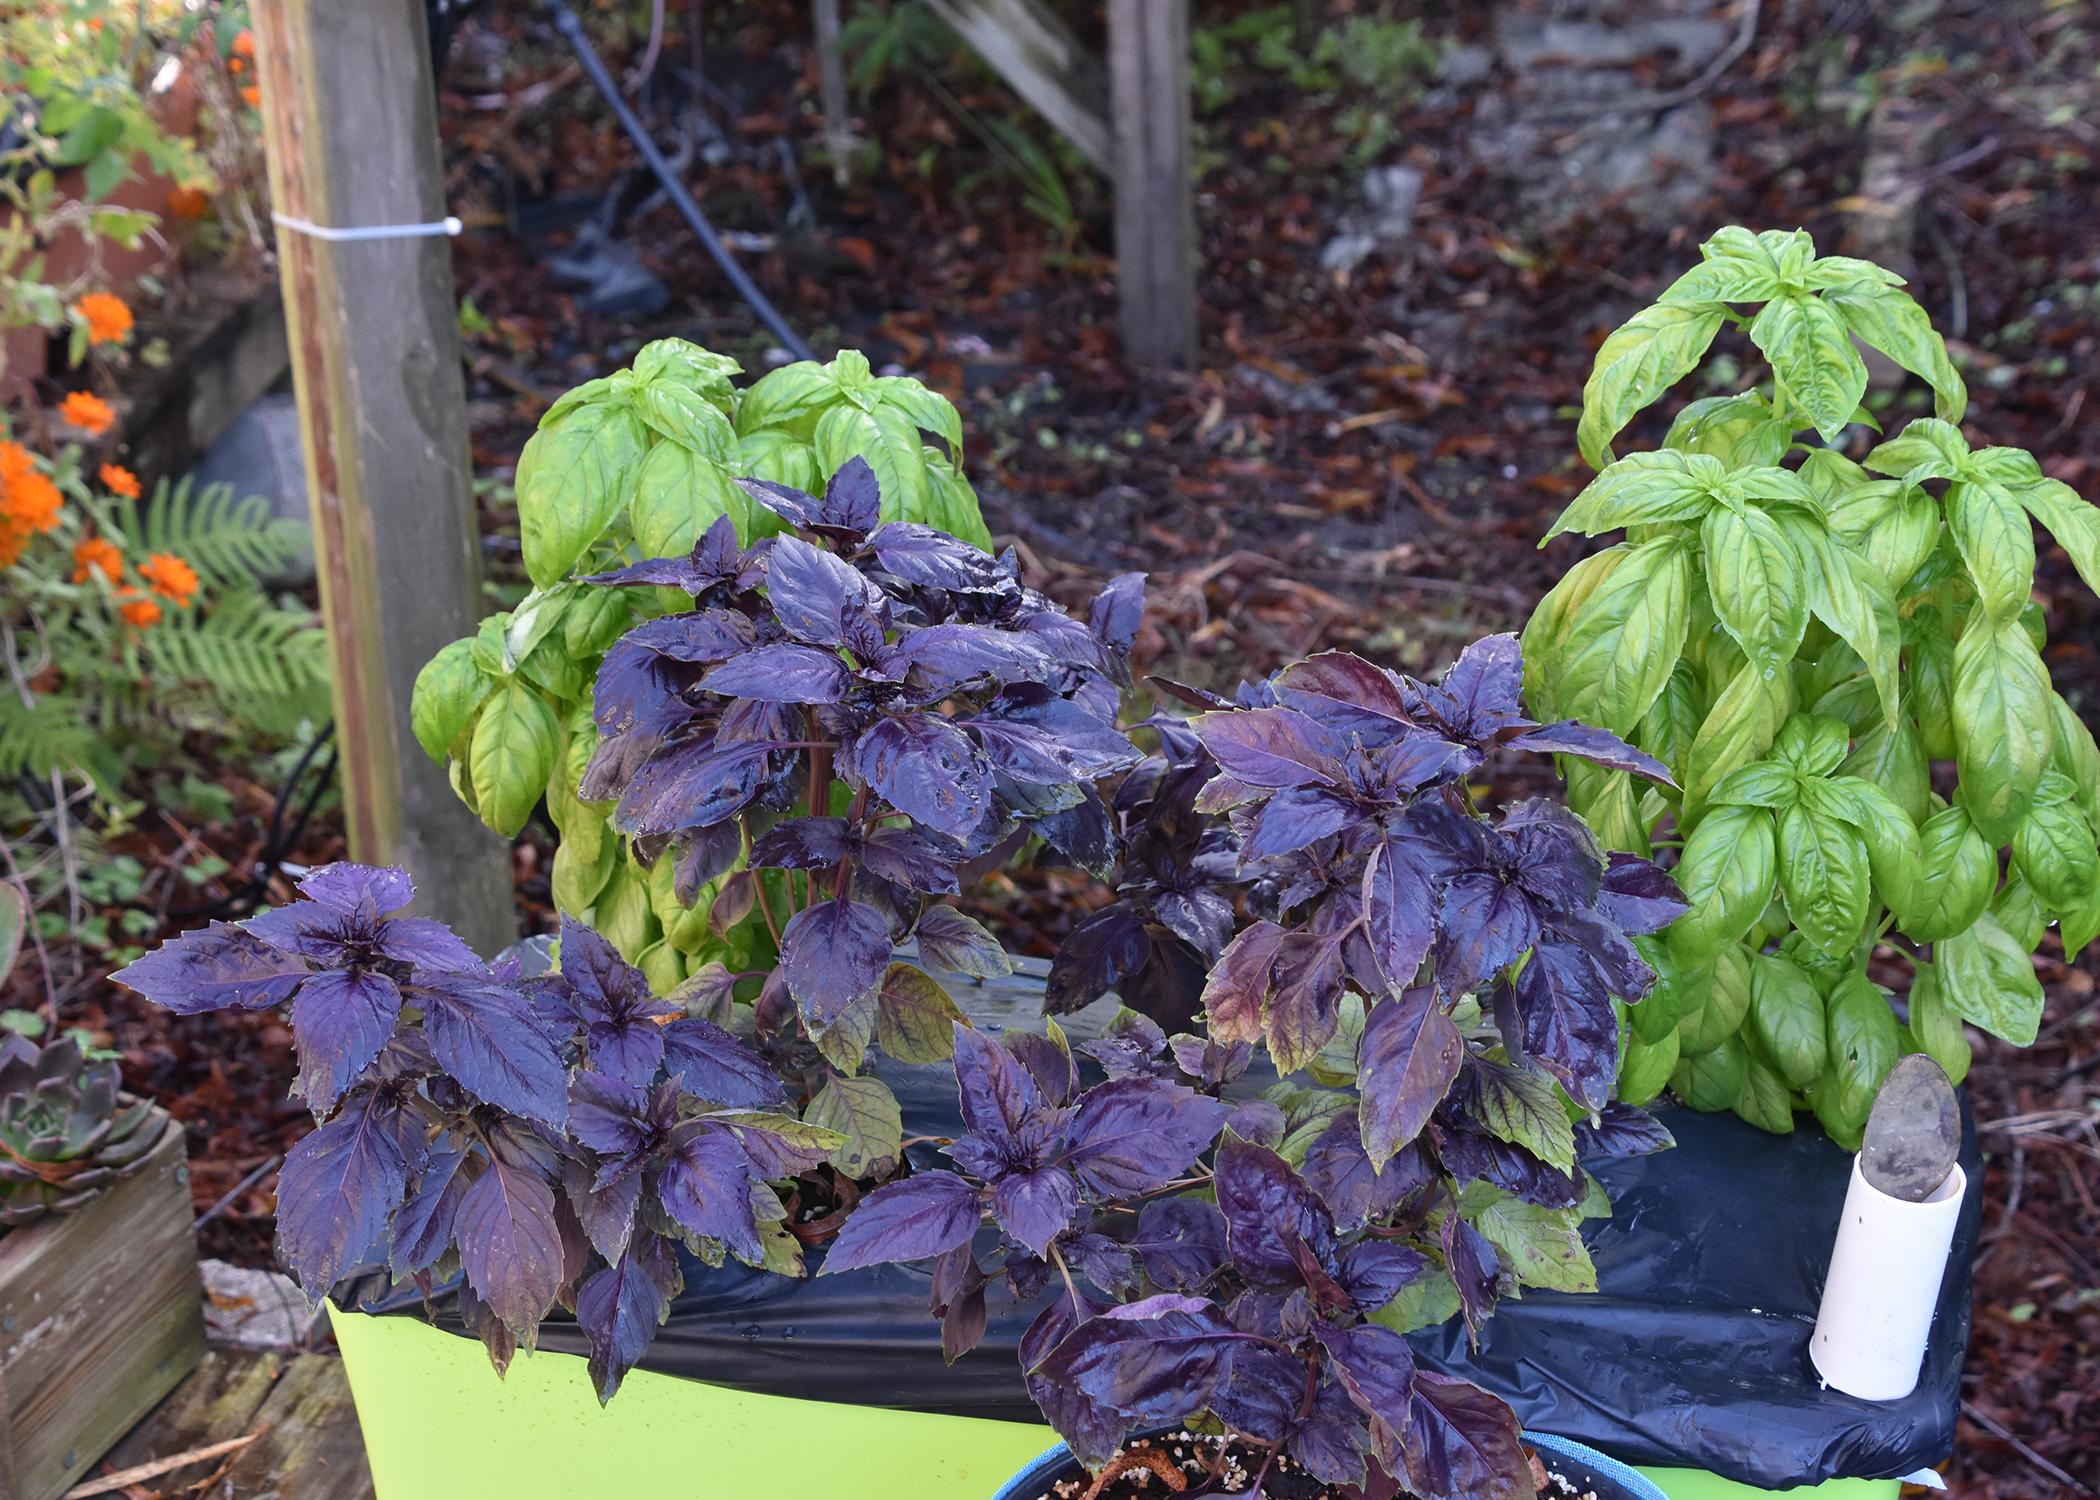 Purple and green plants grow from a rectangular, green container on the ground.